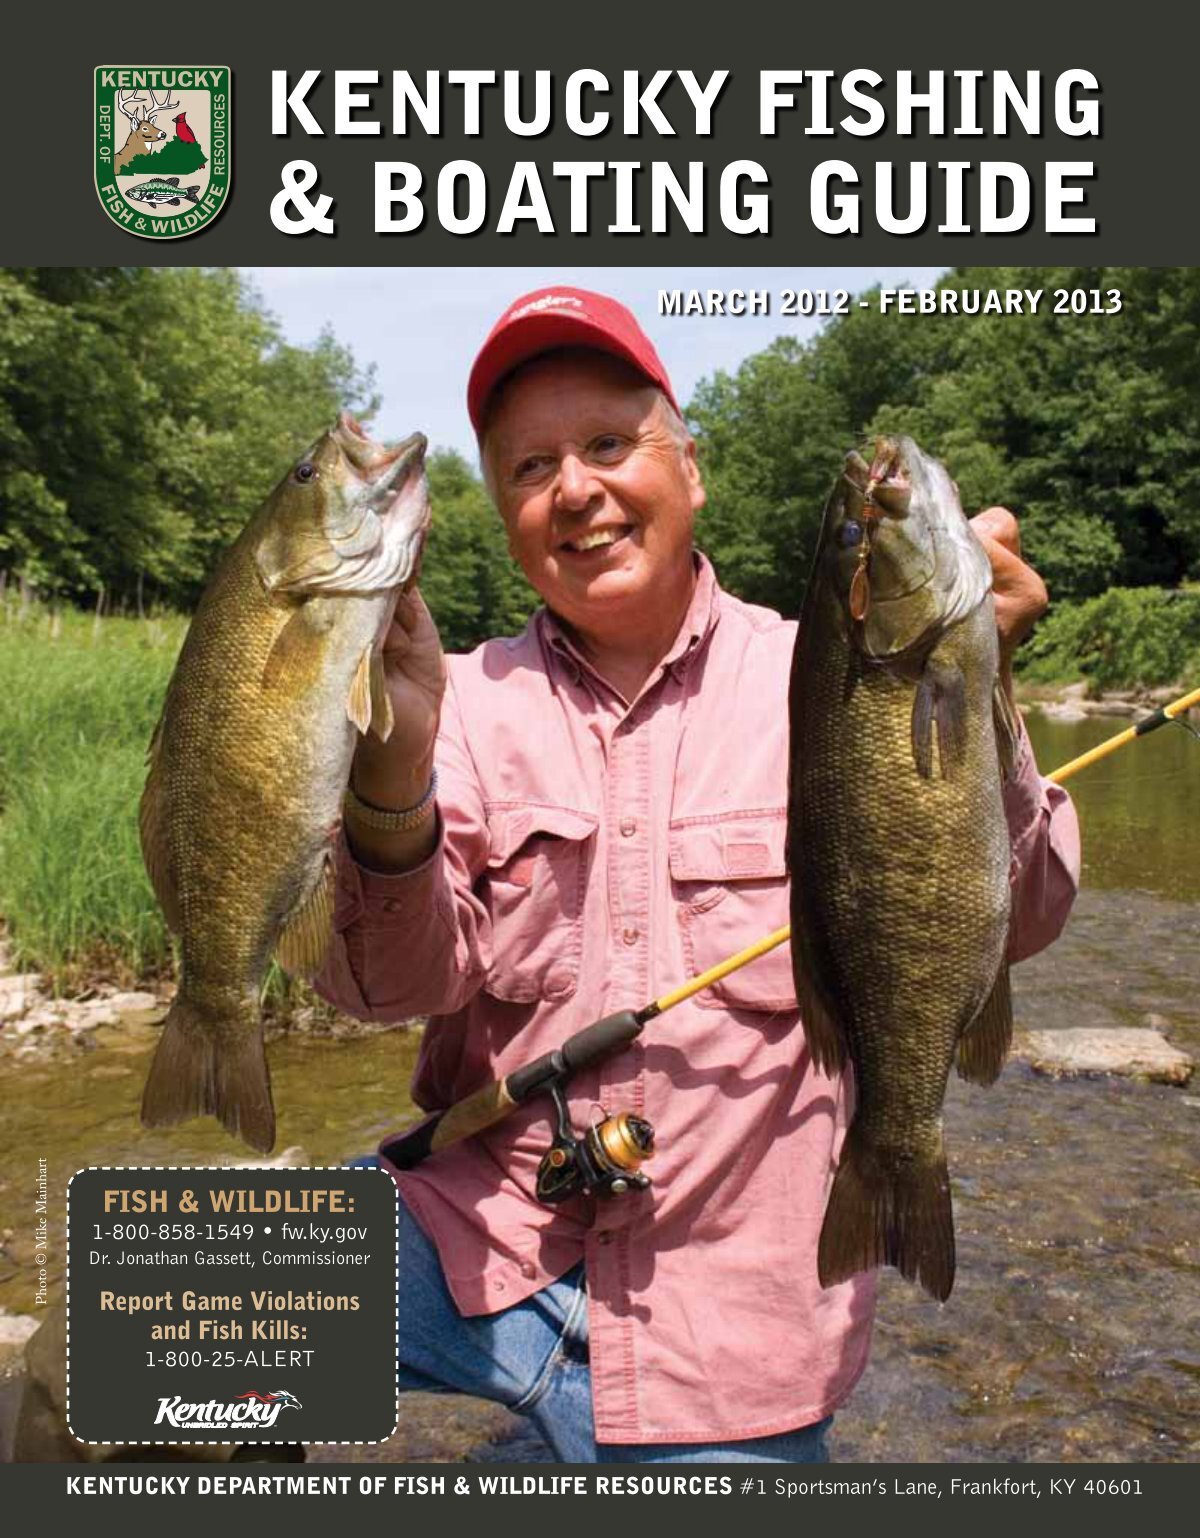 Fishing & Boating Guide - Kentucky Department of Fish and Wildlife